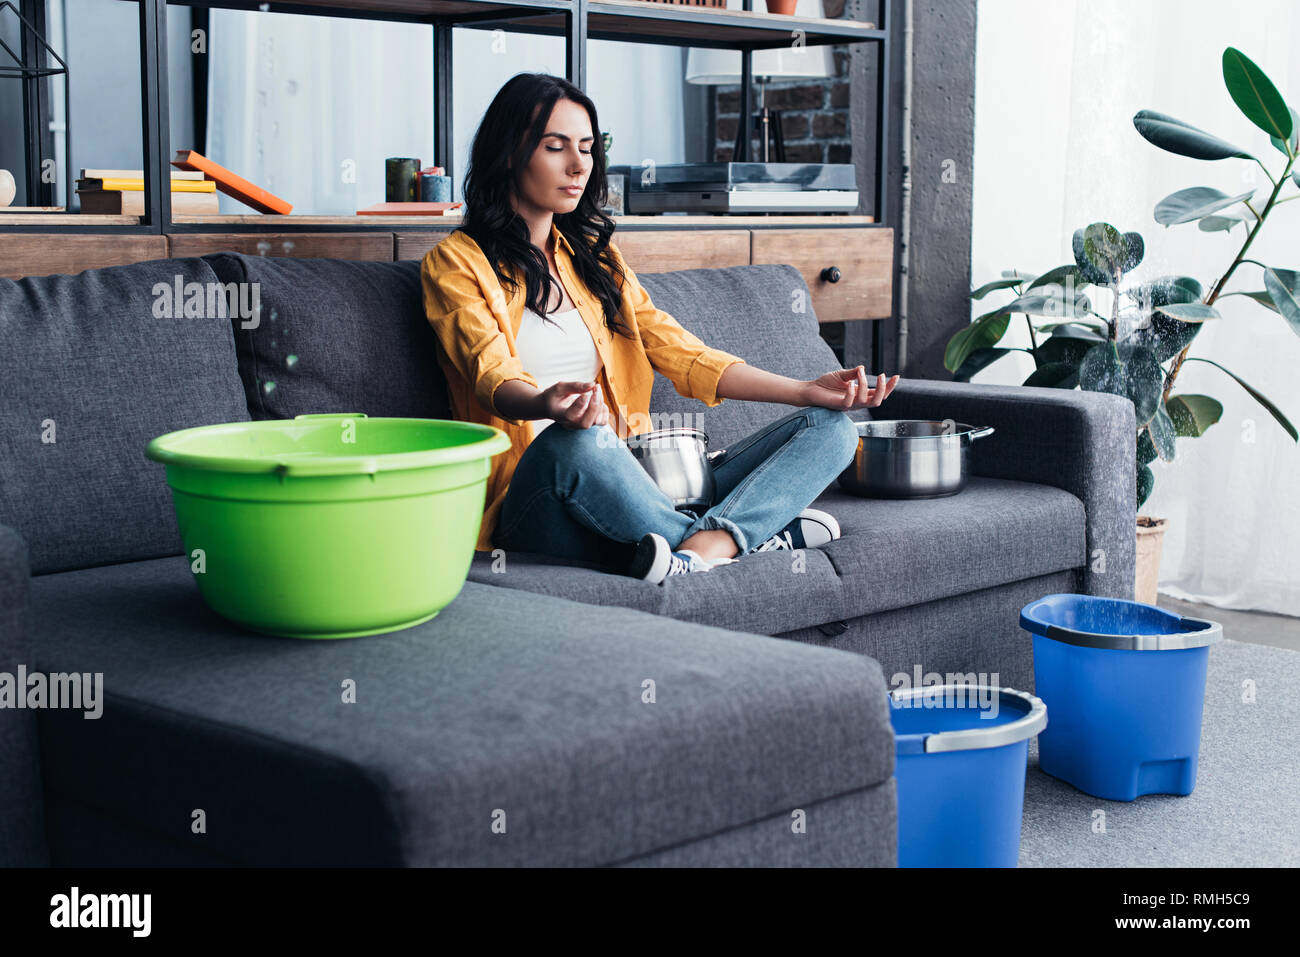 Woman sitting in yoga pose during water damage in living room Stock Photo